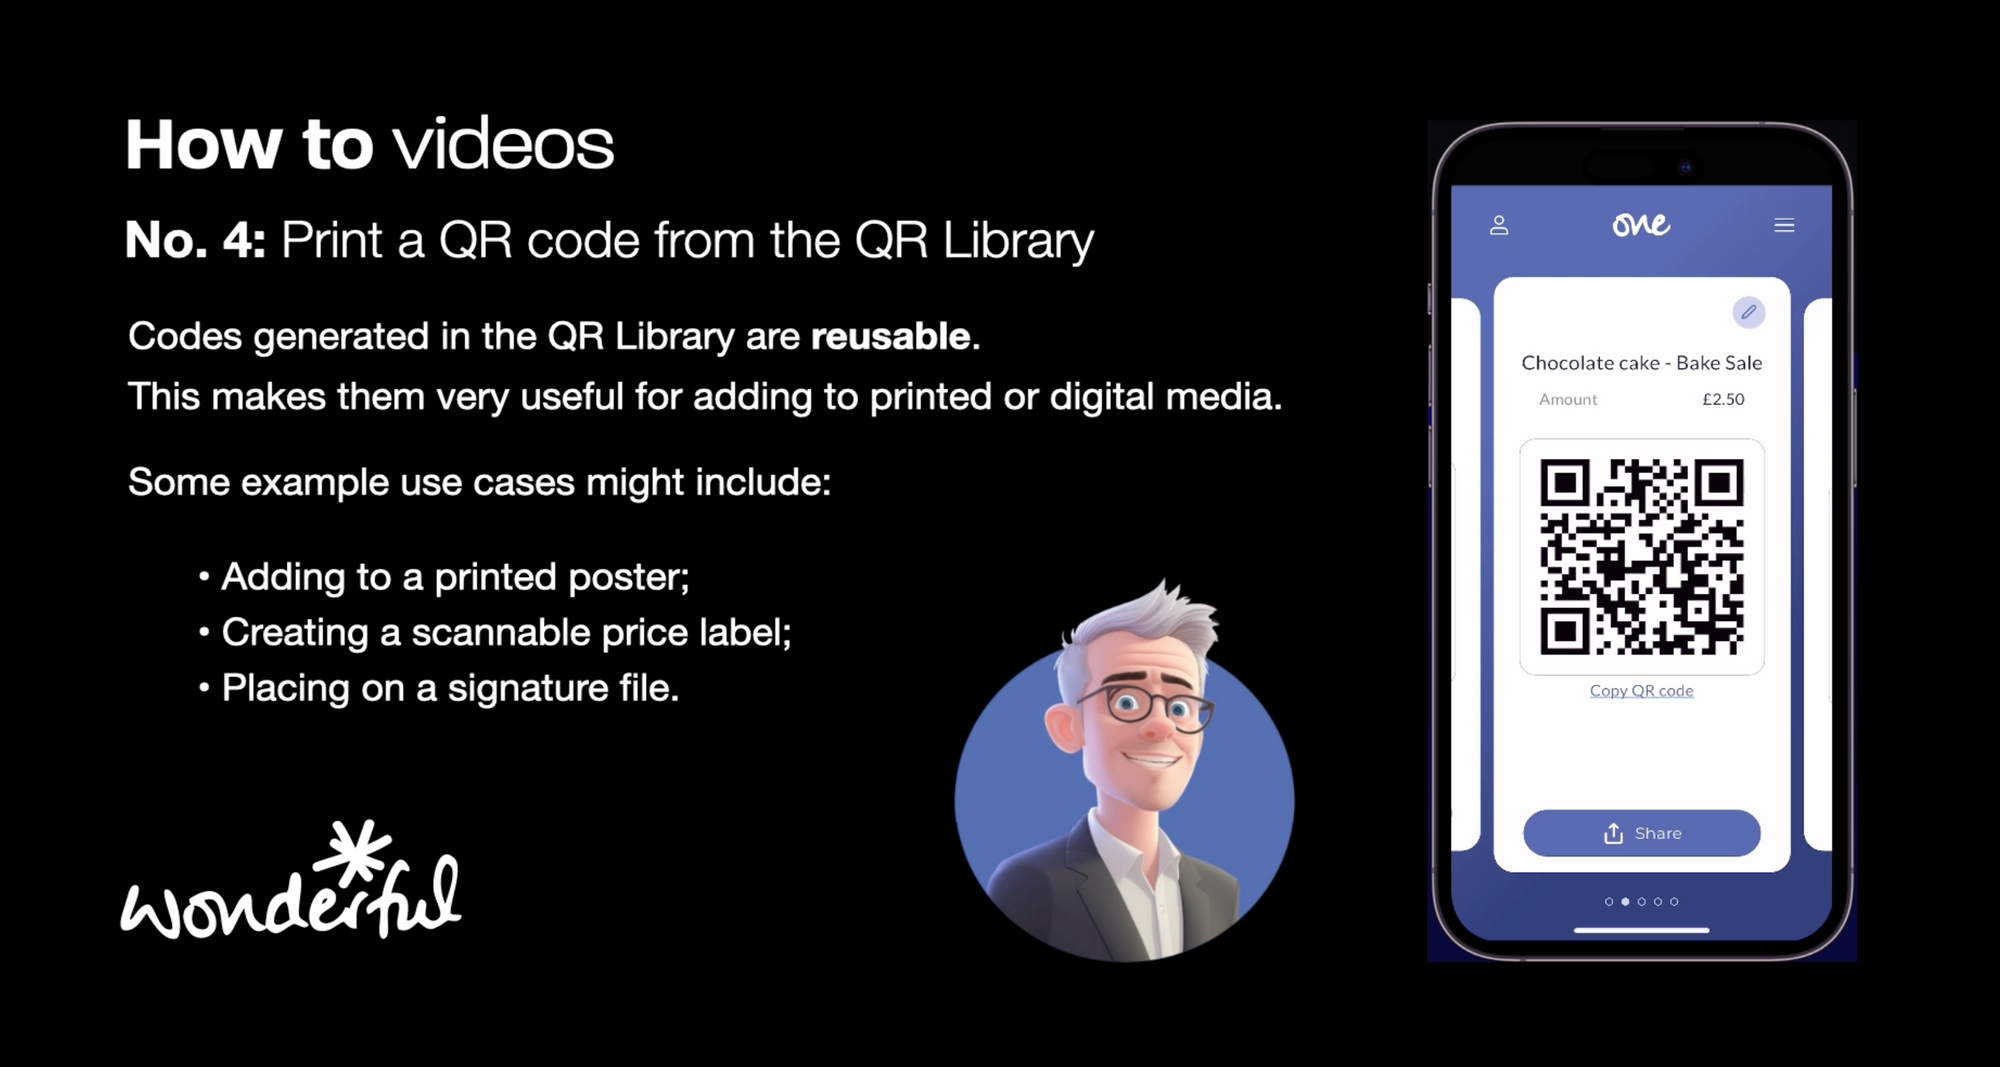 Print a QR code from the QR Library